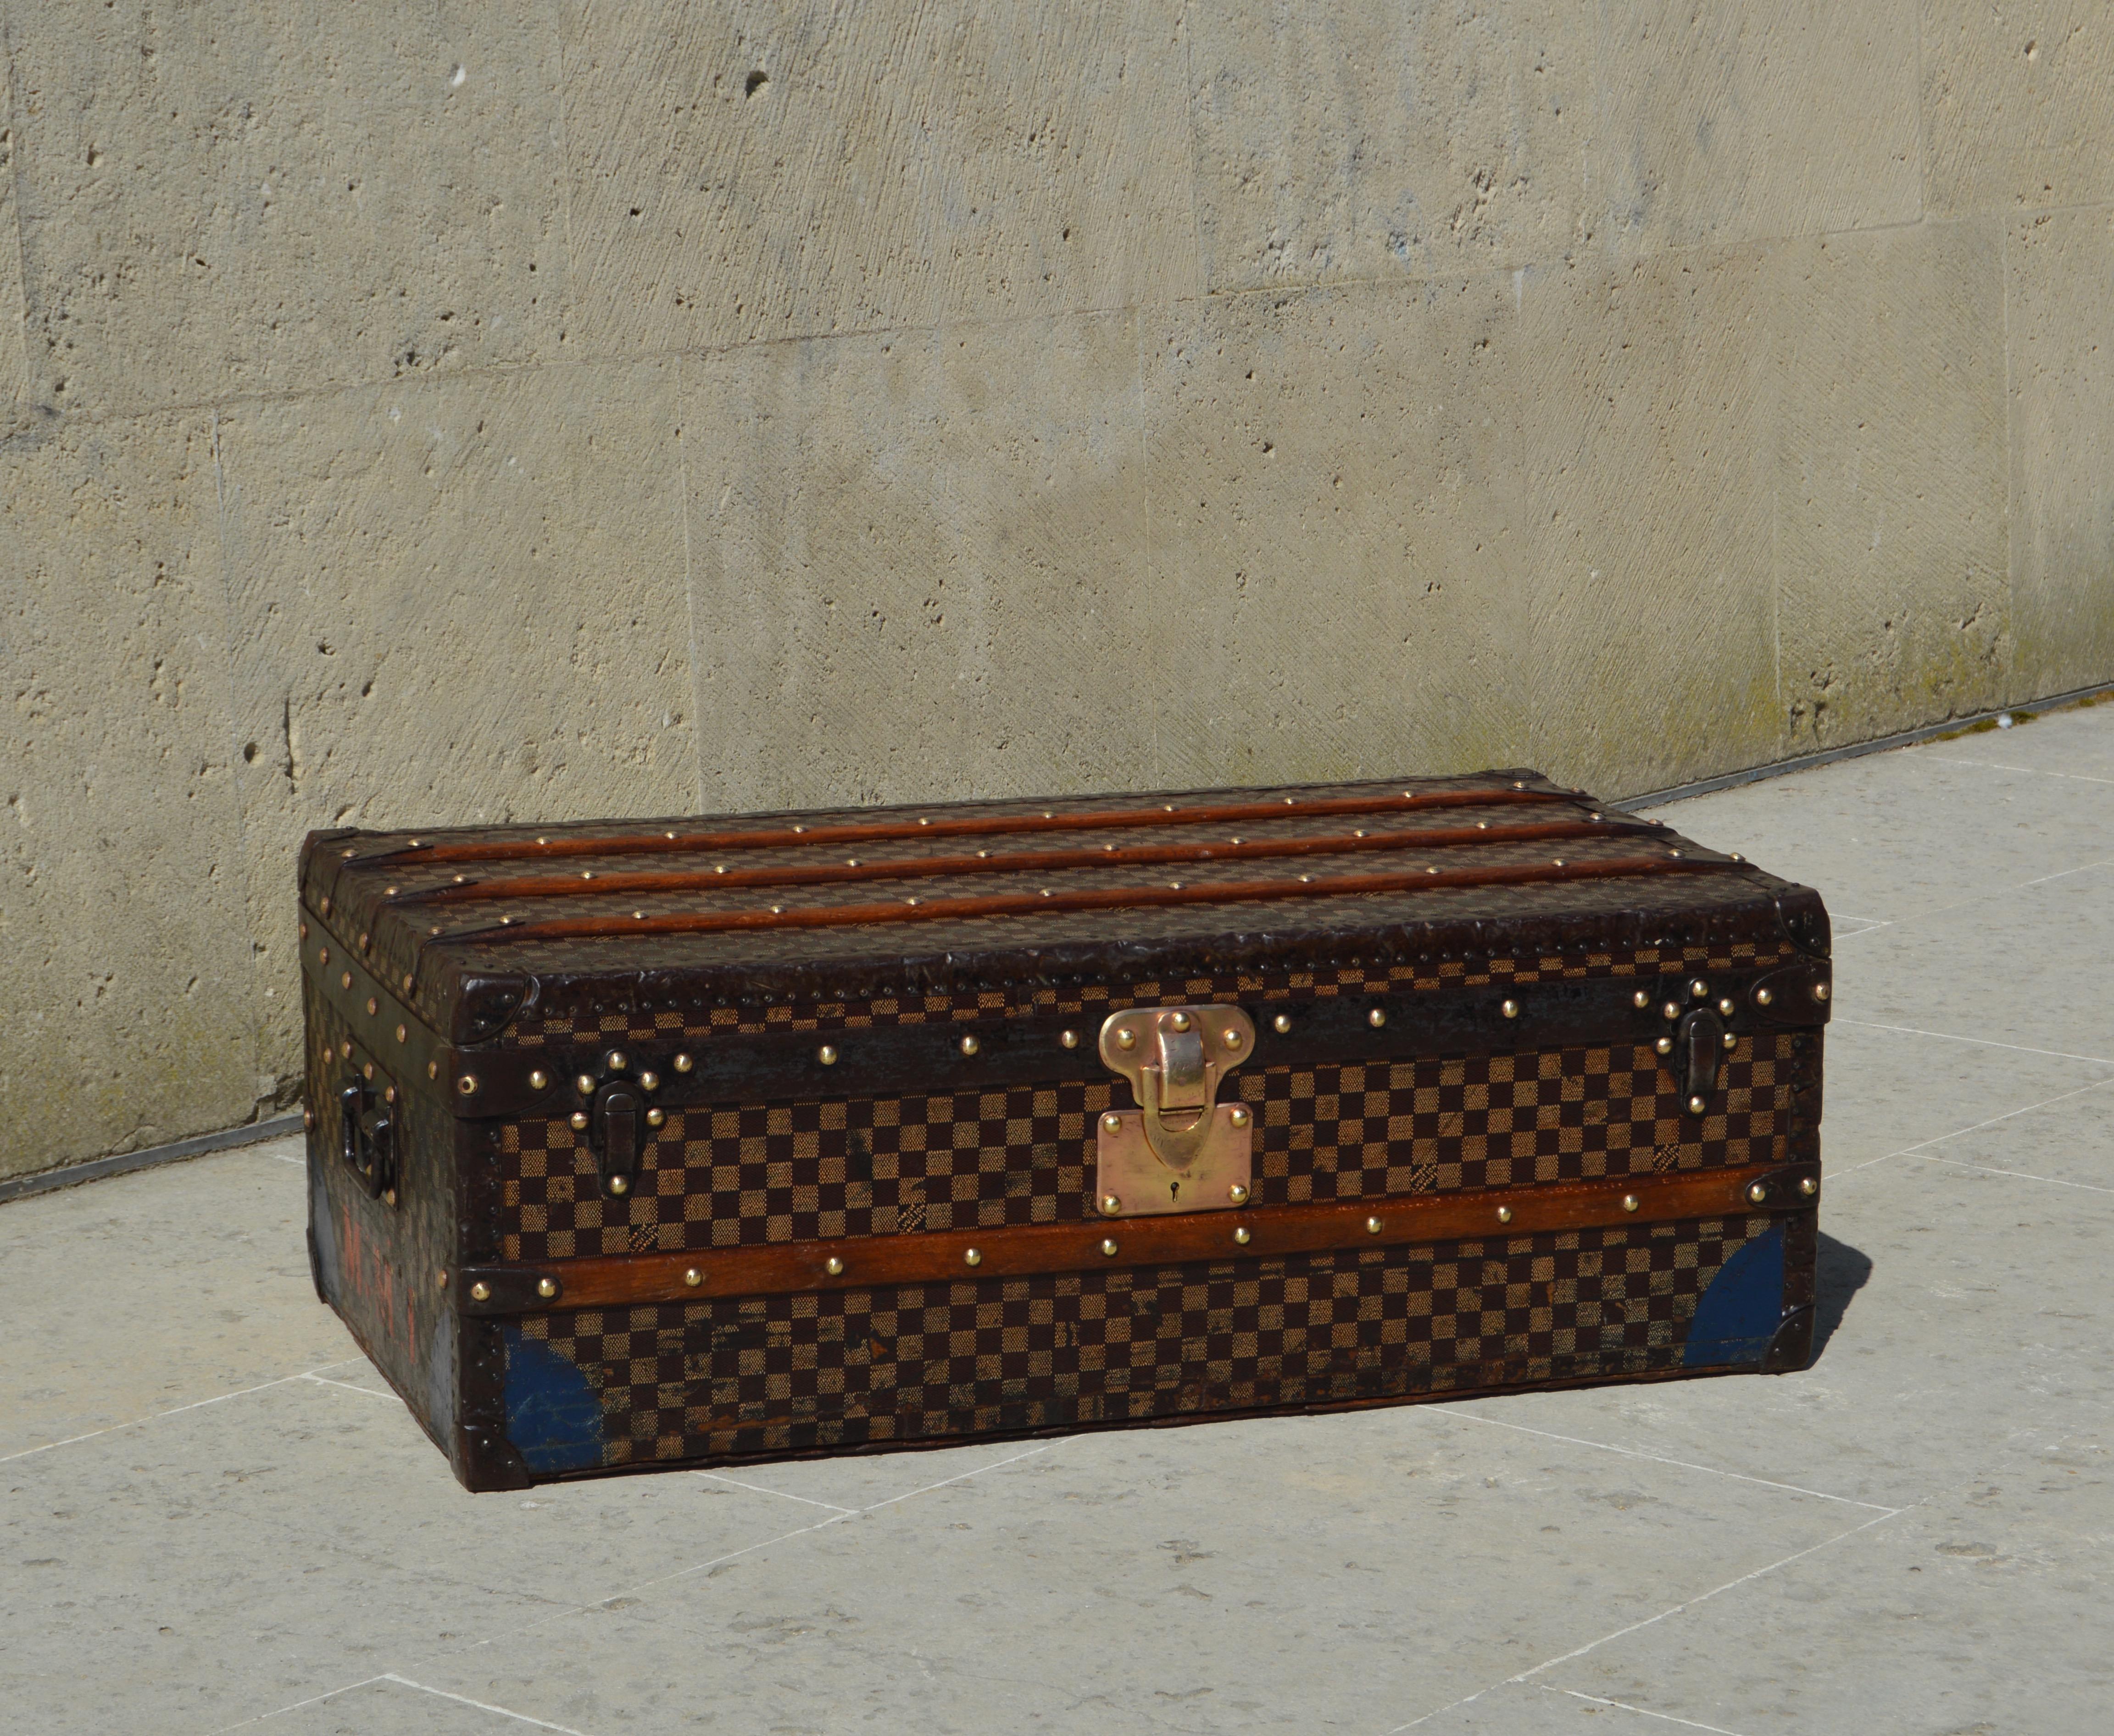 Superb Louis Vuitton trunk from 1893 covered with the first checkerboard fabric of the brand. The term 